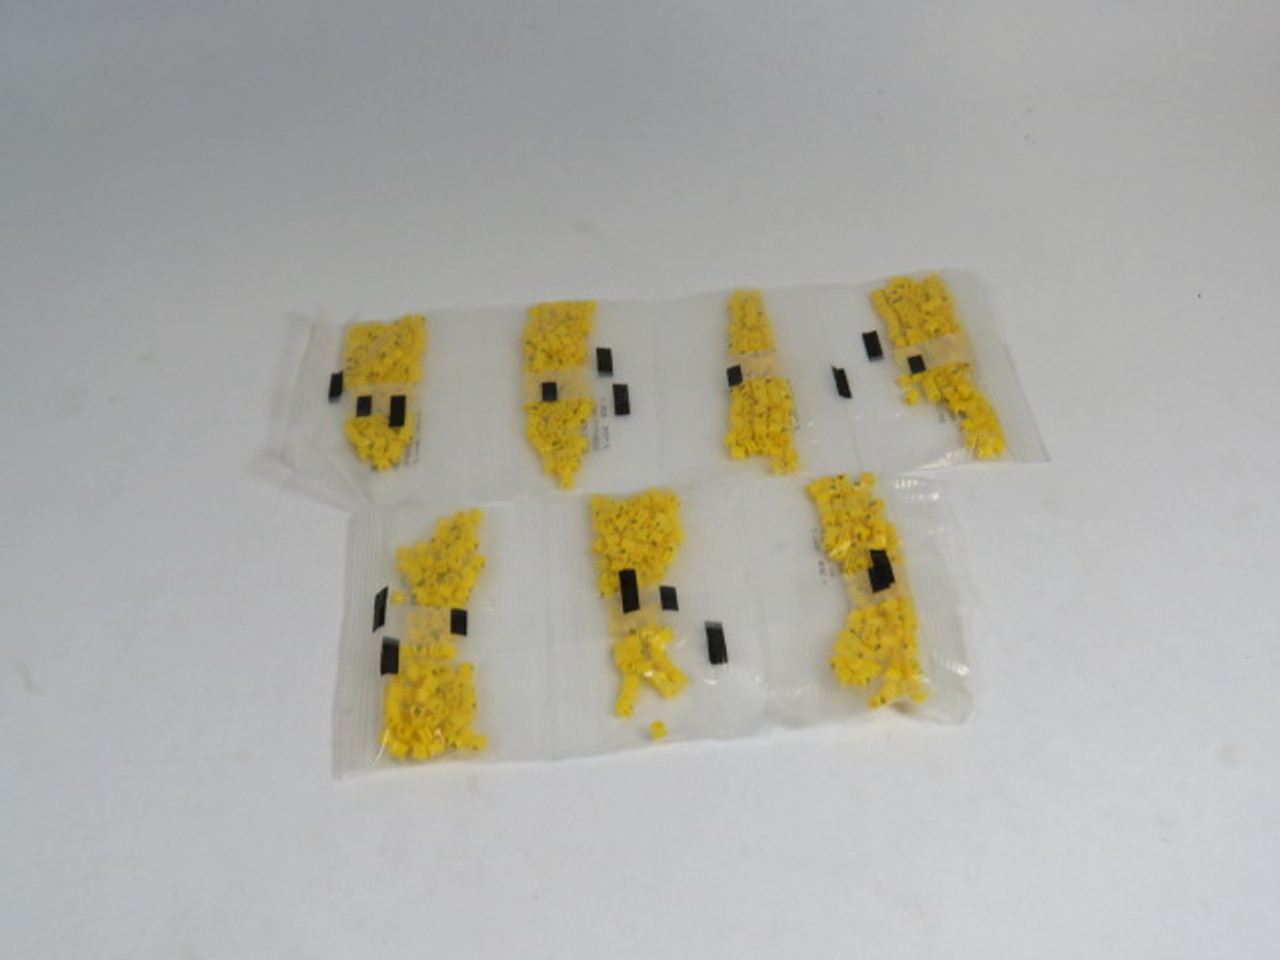 Critchley 11531404 Yellow Cable Marker #4 Z9 Chevron Cut 700-Pack ! NEW !